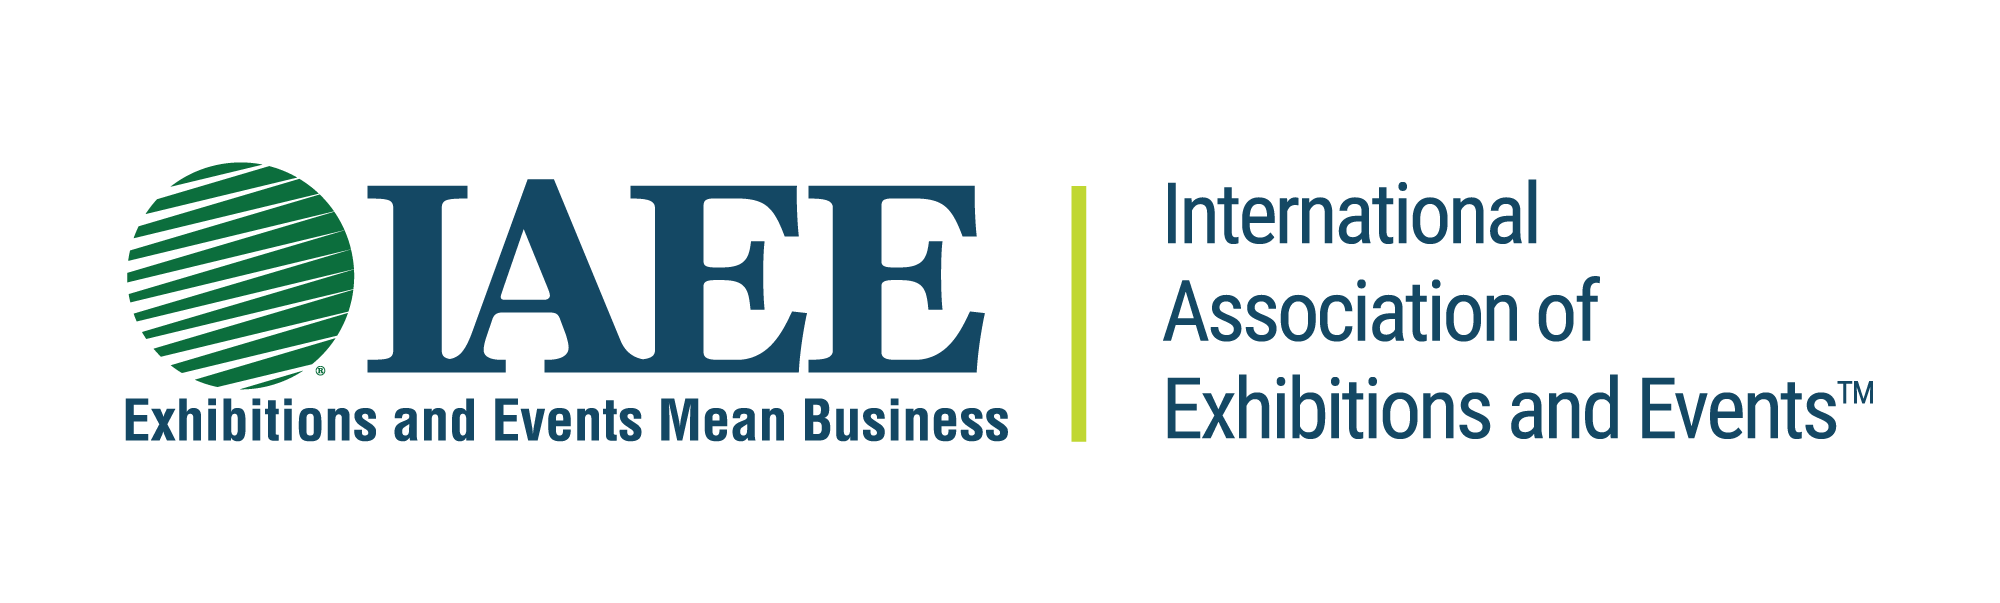 Exhibition Industry Foundation